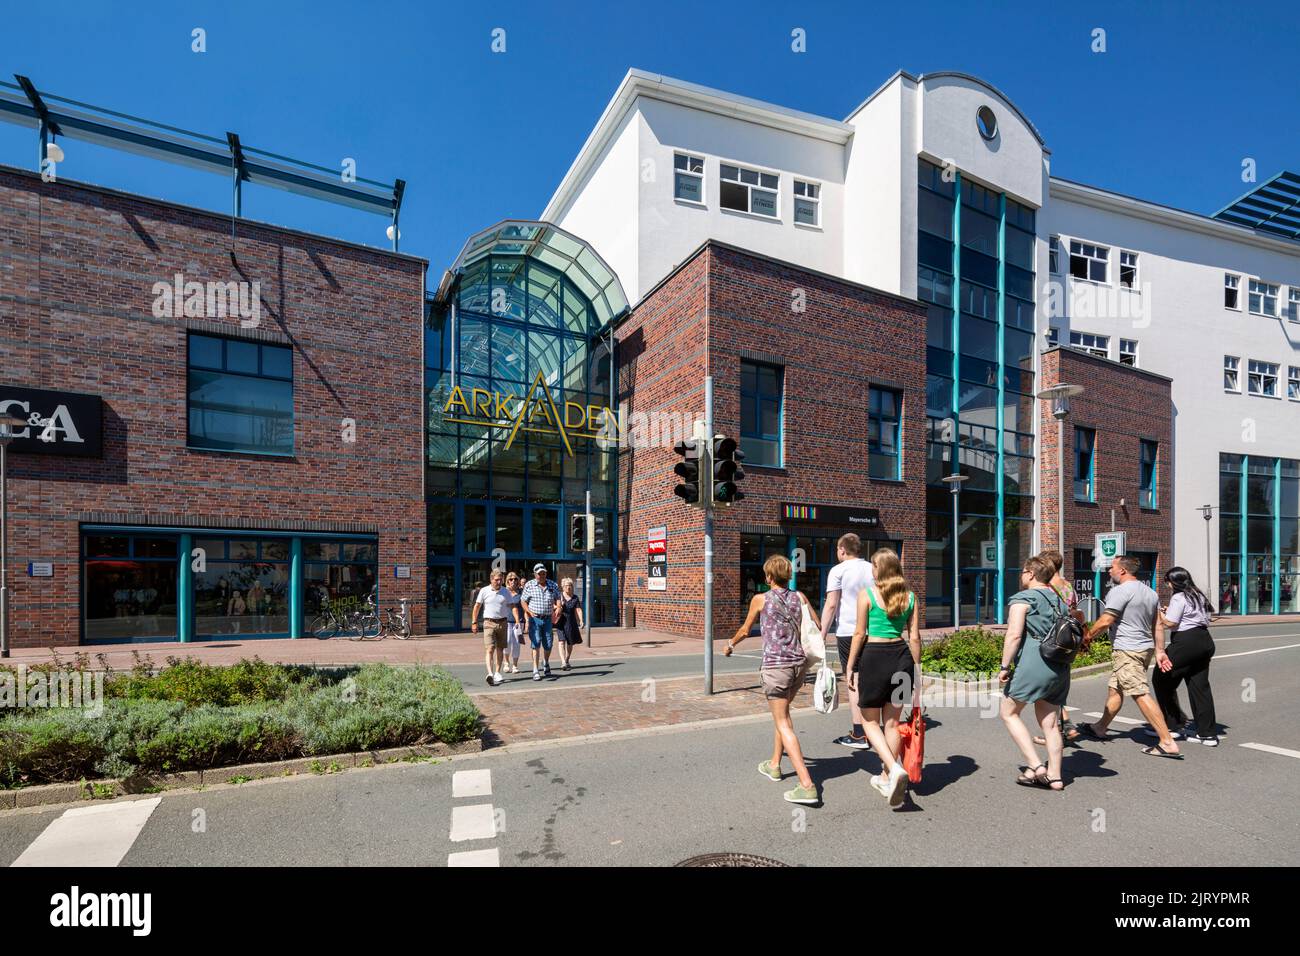 Germany, Bocholt, Lower Rhine, Westmuensterland, Muensterland, Westphalia, North Rhine-Westphalia, NRW, people at the retail park Shopping Arcades Stock Photo